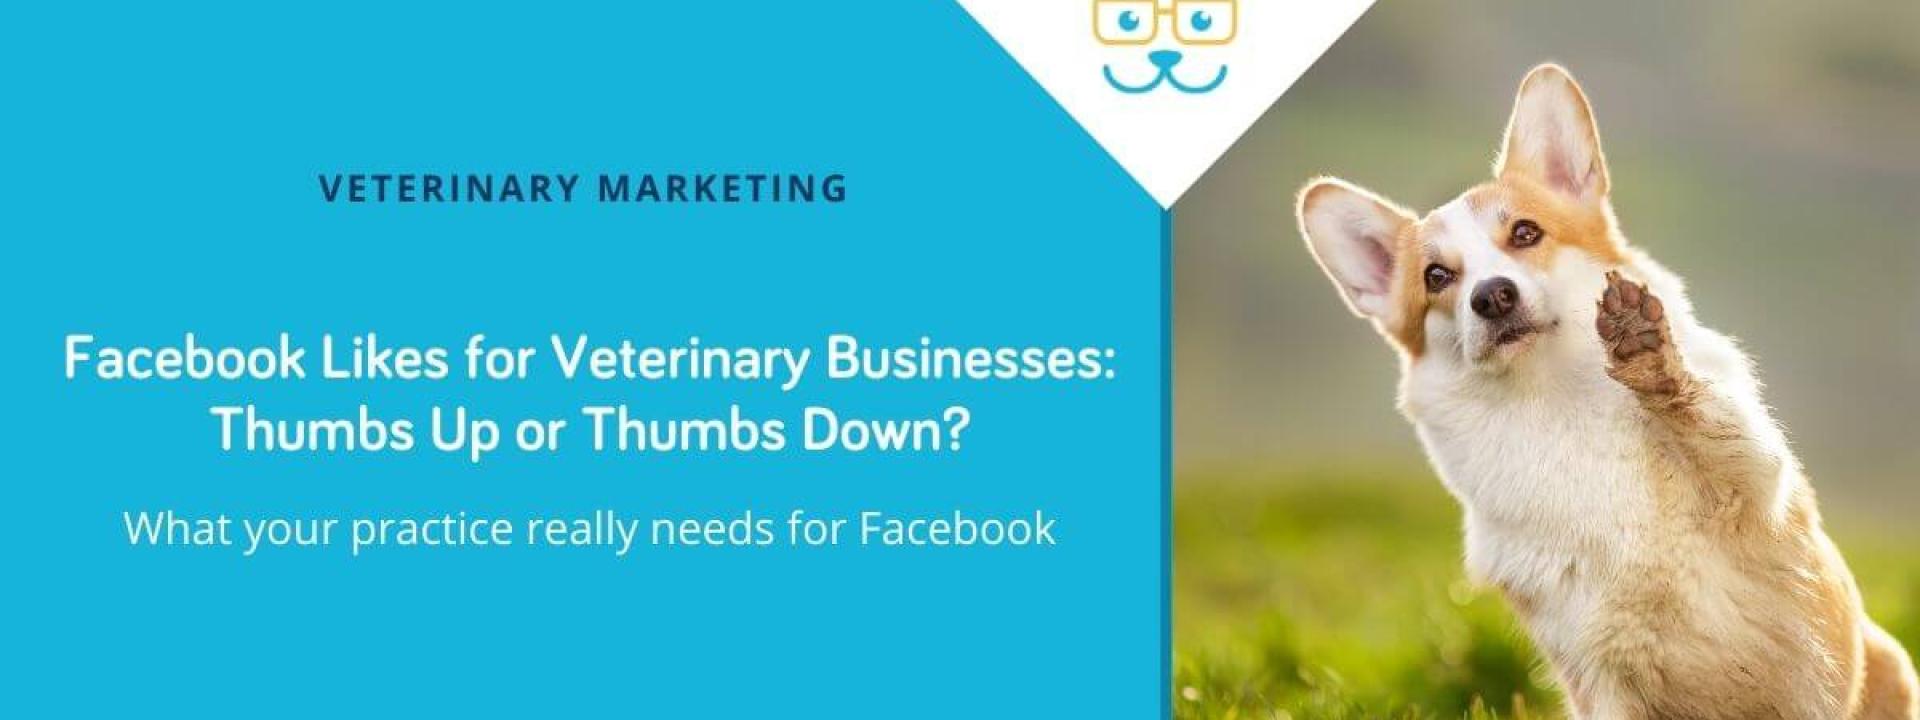 Facebook Likes for Veterinary Businesses: Thumbs Up or Thumbs Down?